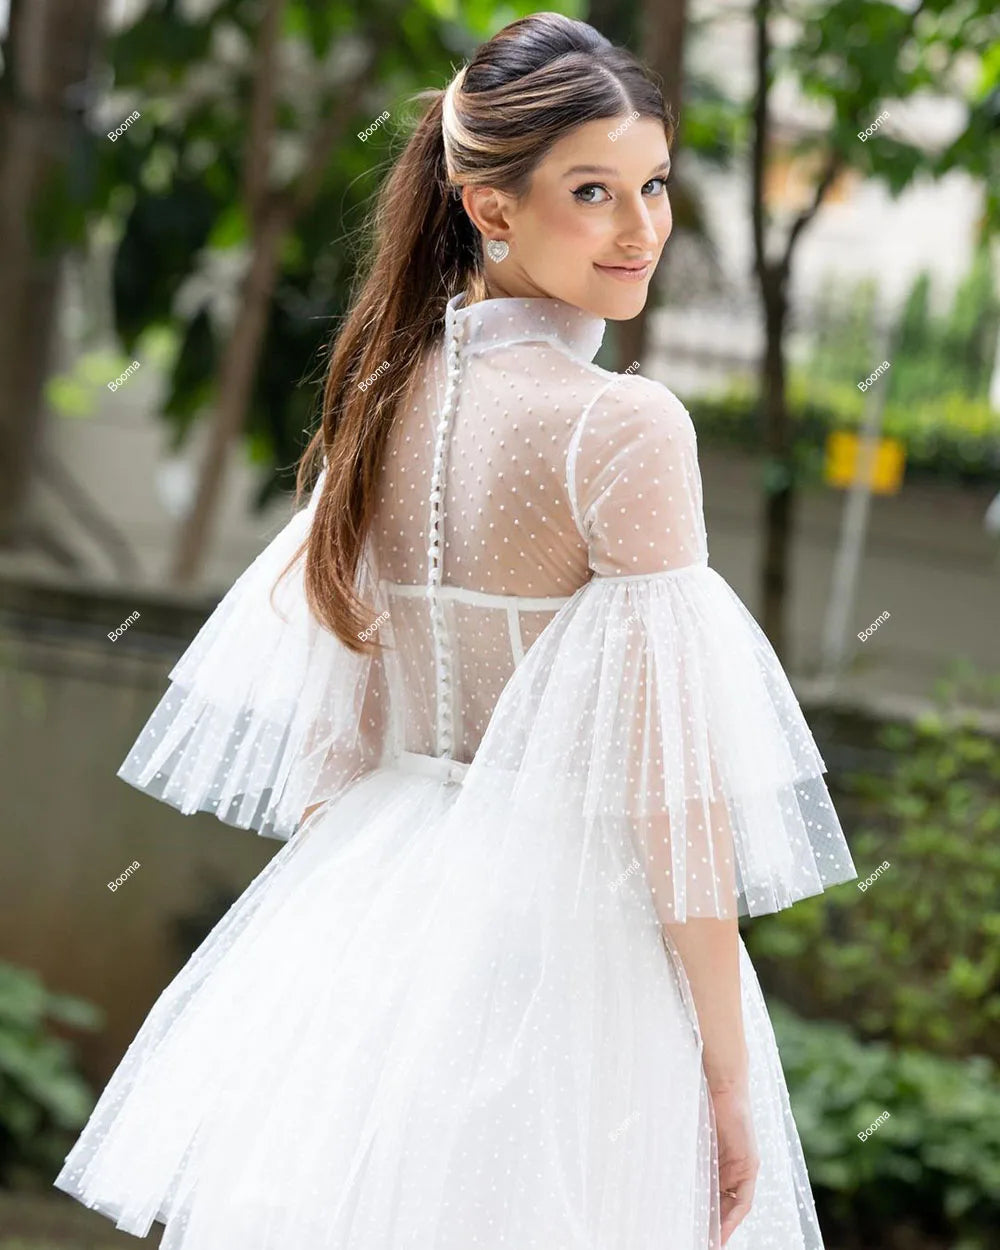 A-Line Midi Wedding Party Dresses High Half SleevesTiered Dots Tulle Brides Party Gowns for Women Evening Dresses